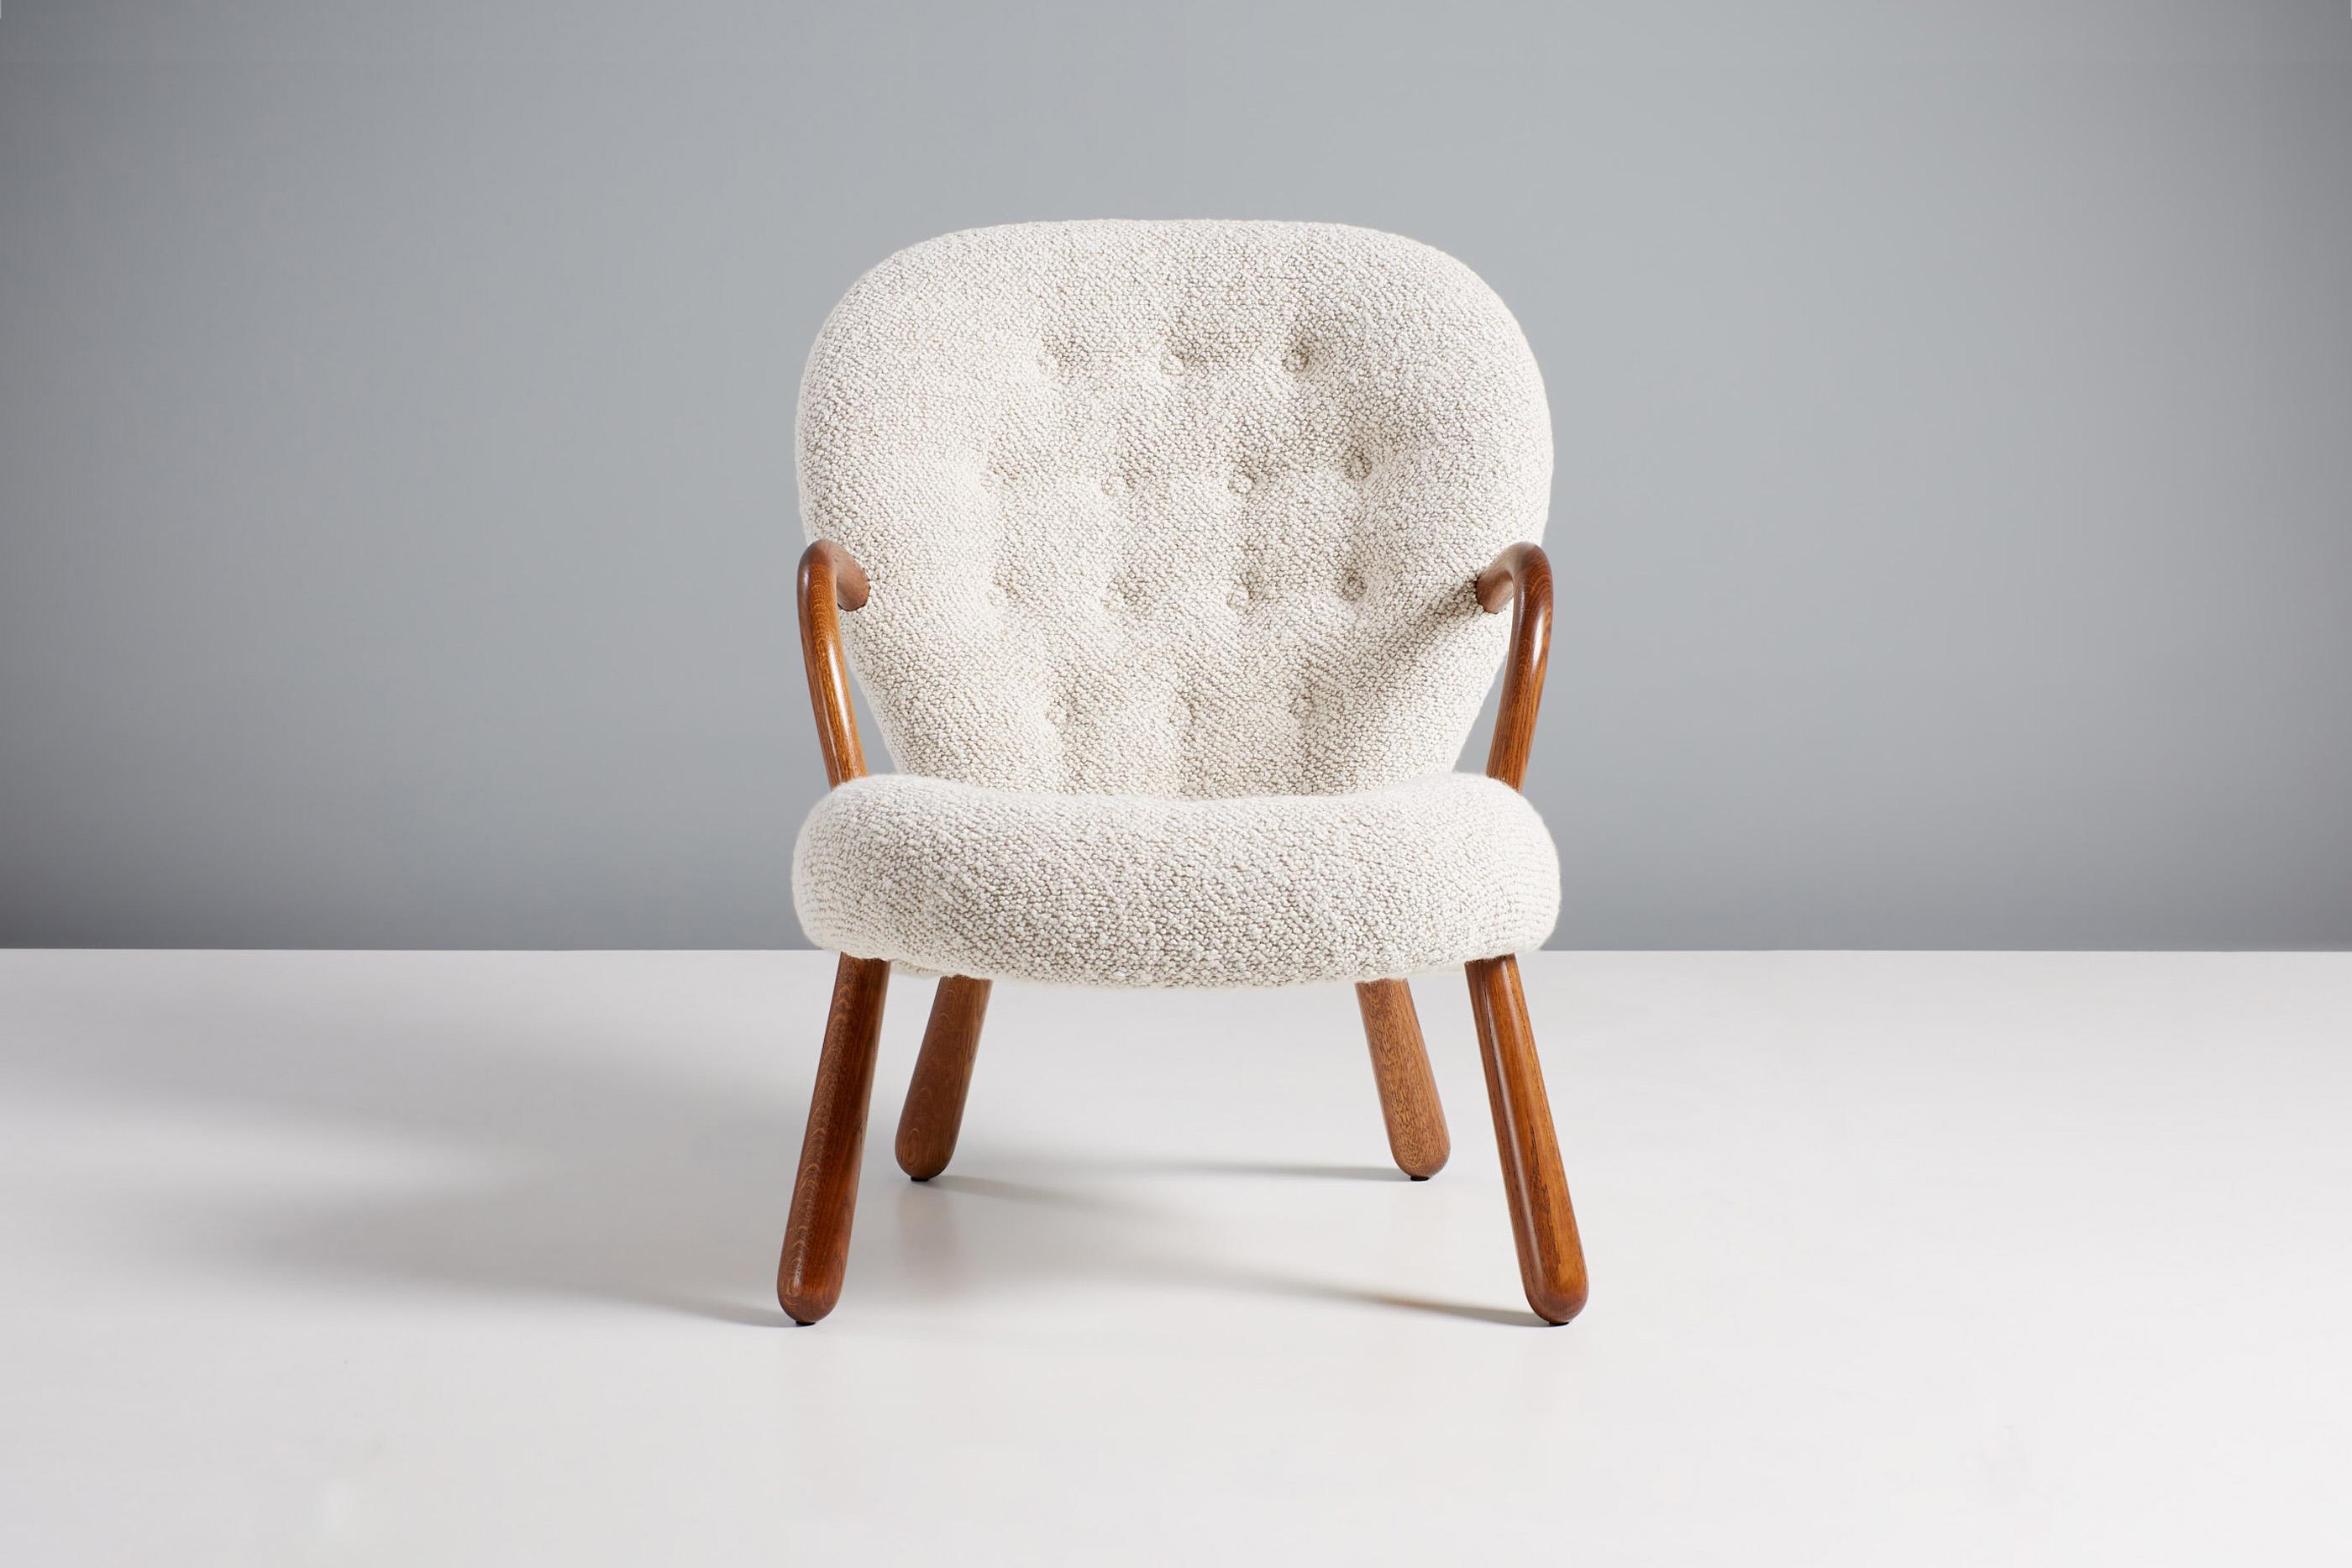 Official Re-Edition of the iconic clam chair by Arnold Madsen.

Dagmar in collaboration with the estate of Arnold Madsen is proud to re-launch the Clam Chair - one of the most cherished and sought after Scandinavian furniture designs of the 20th